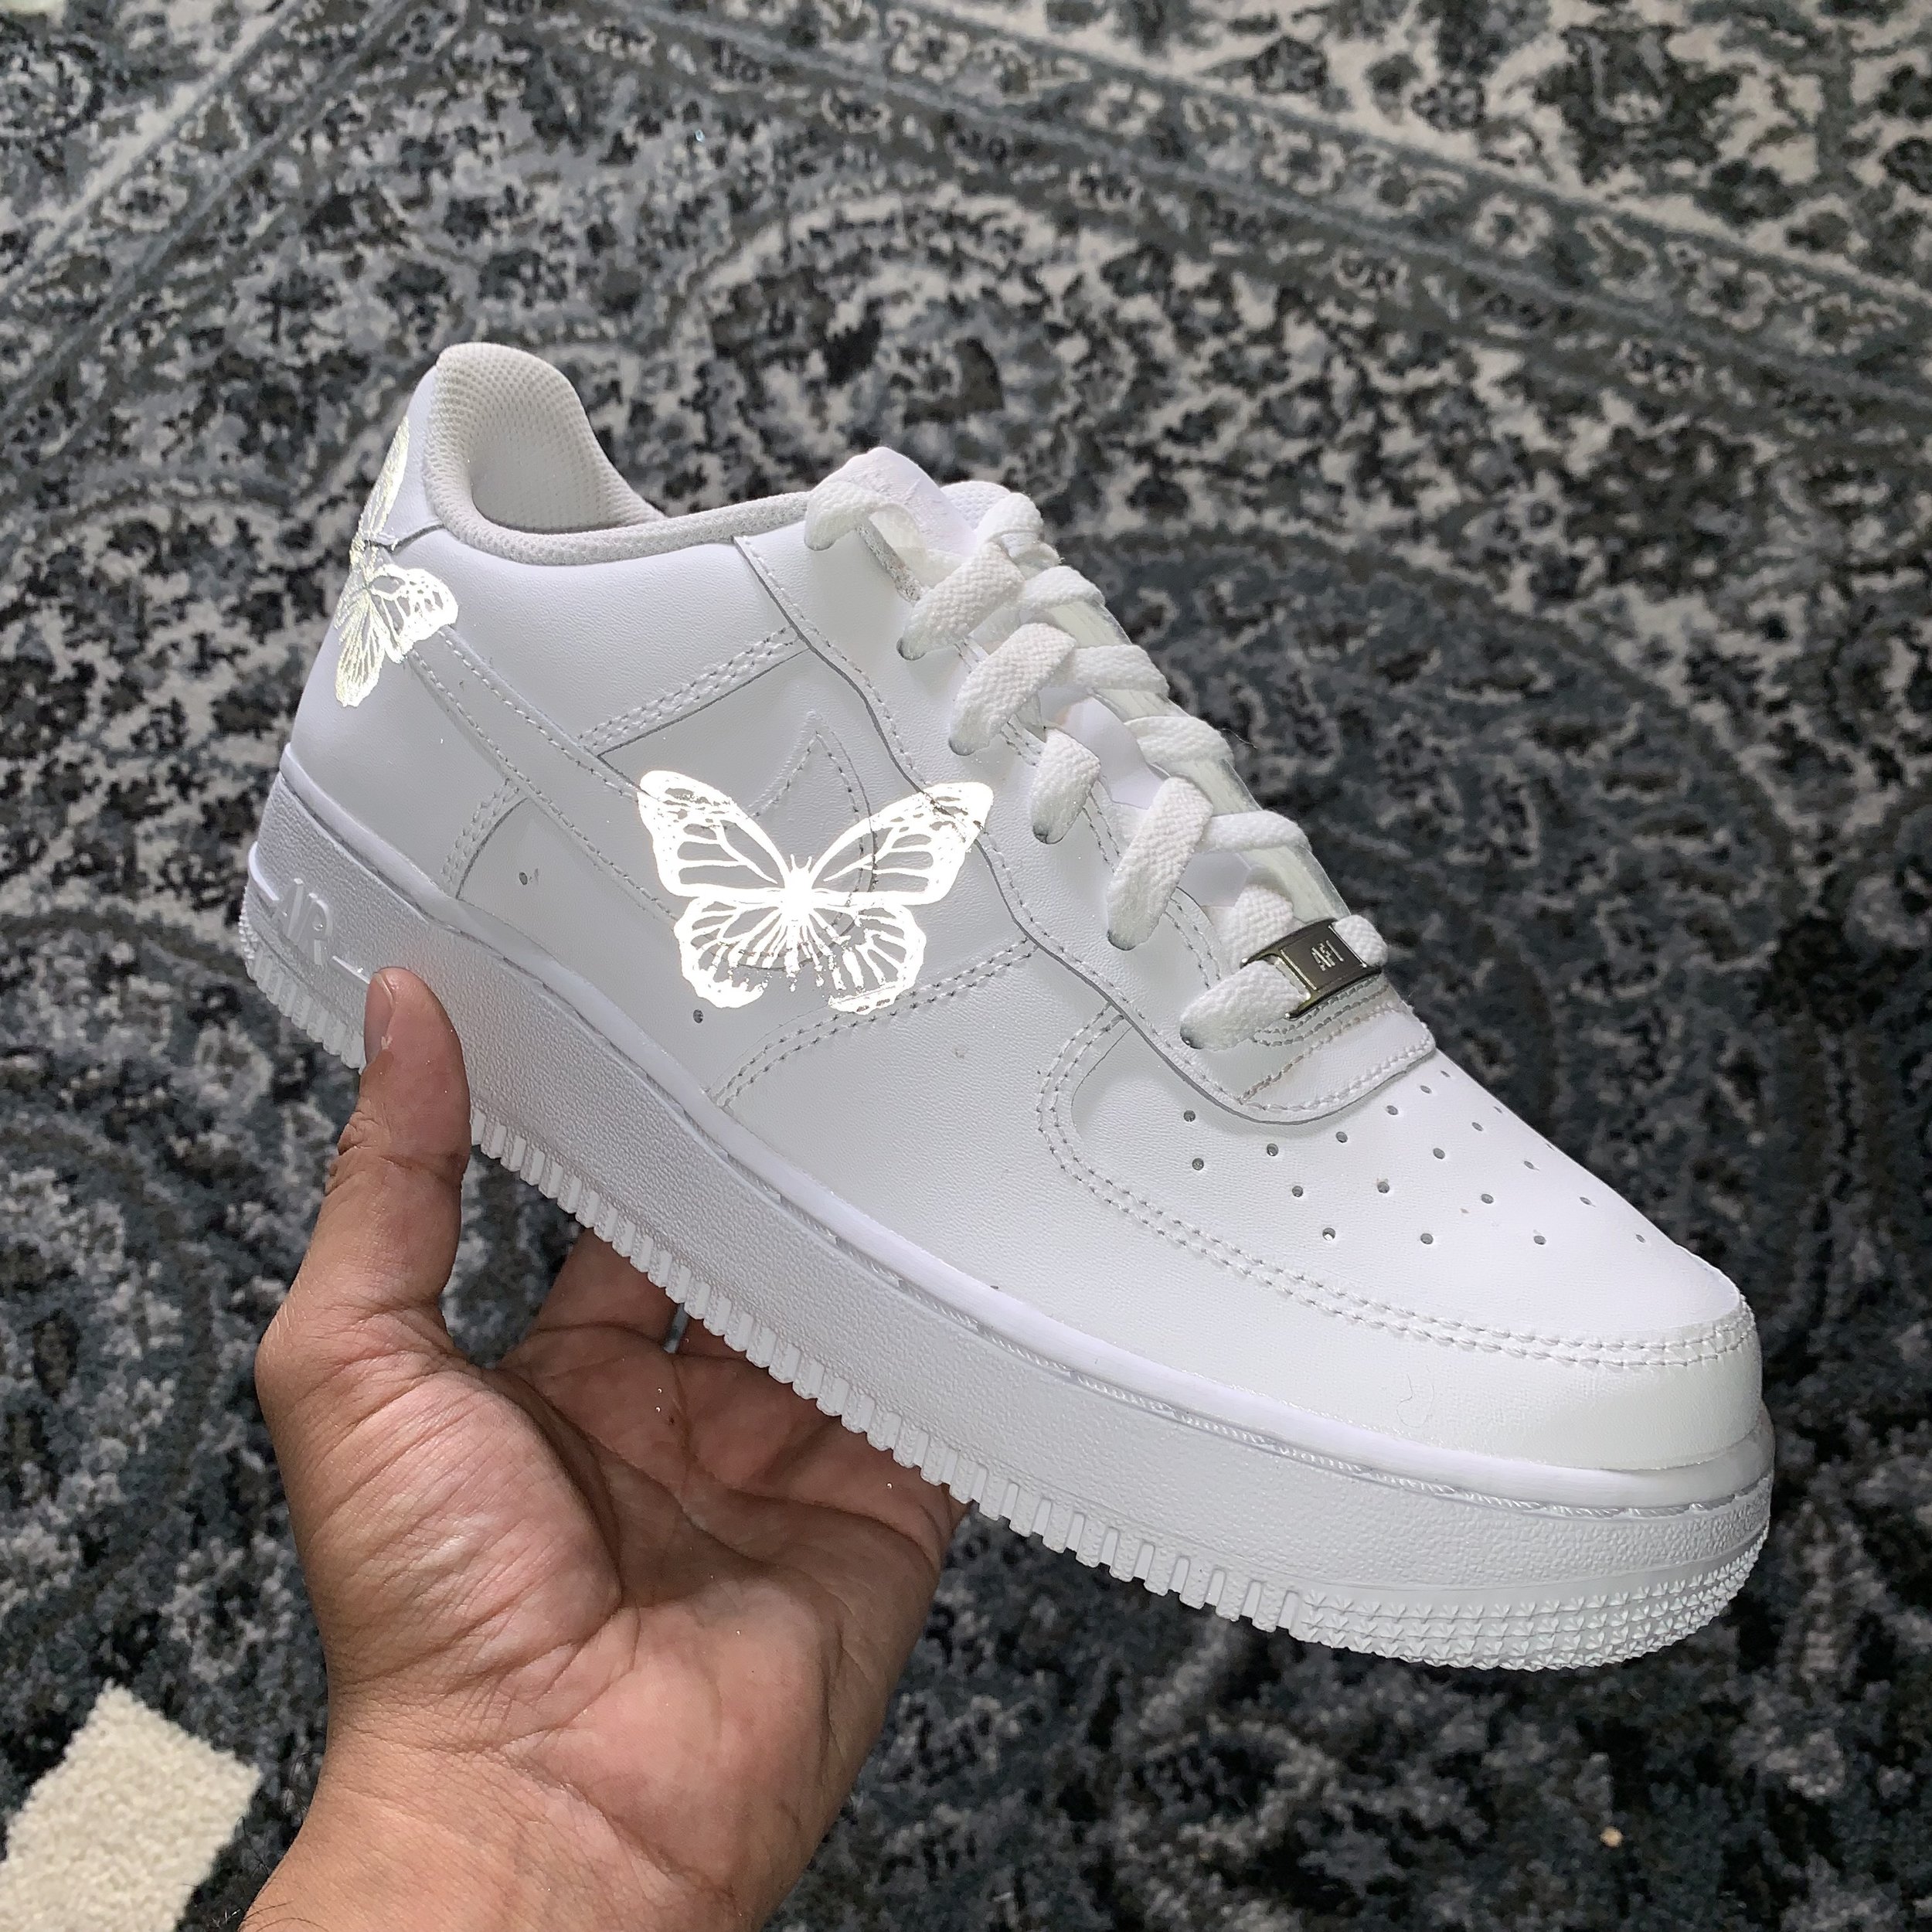 white nike air force with butterflies